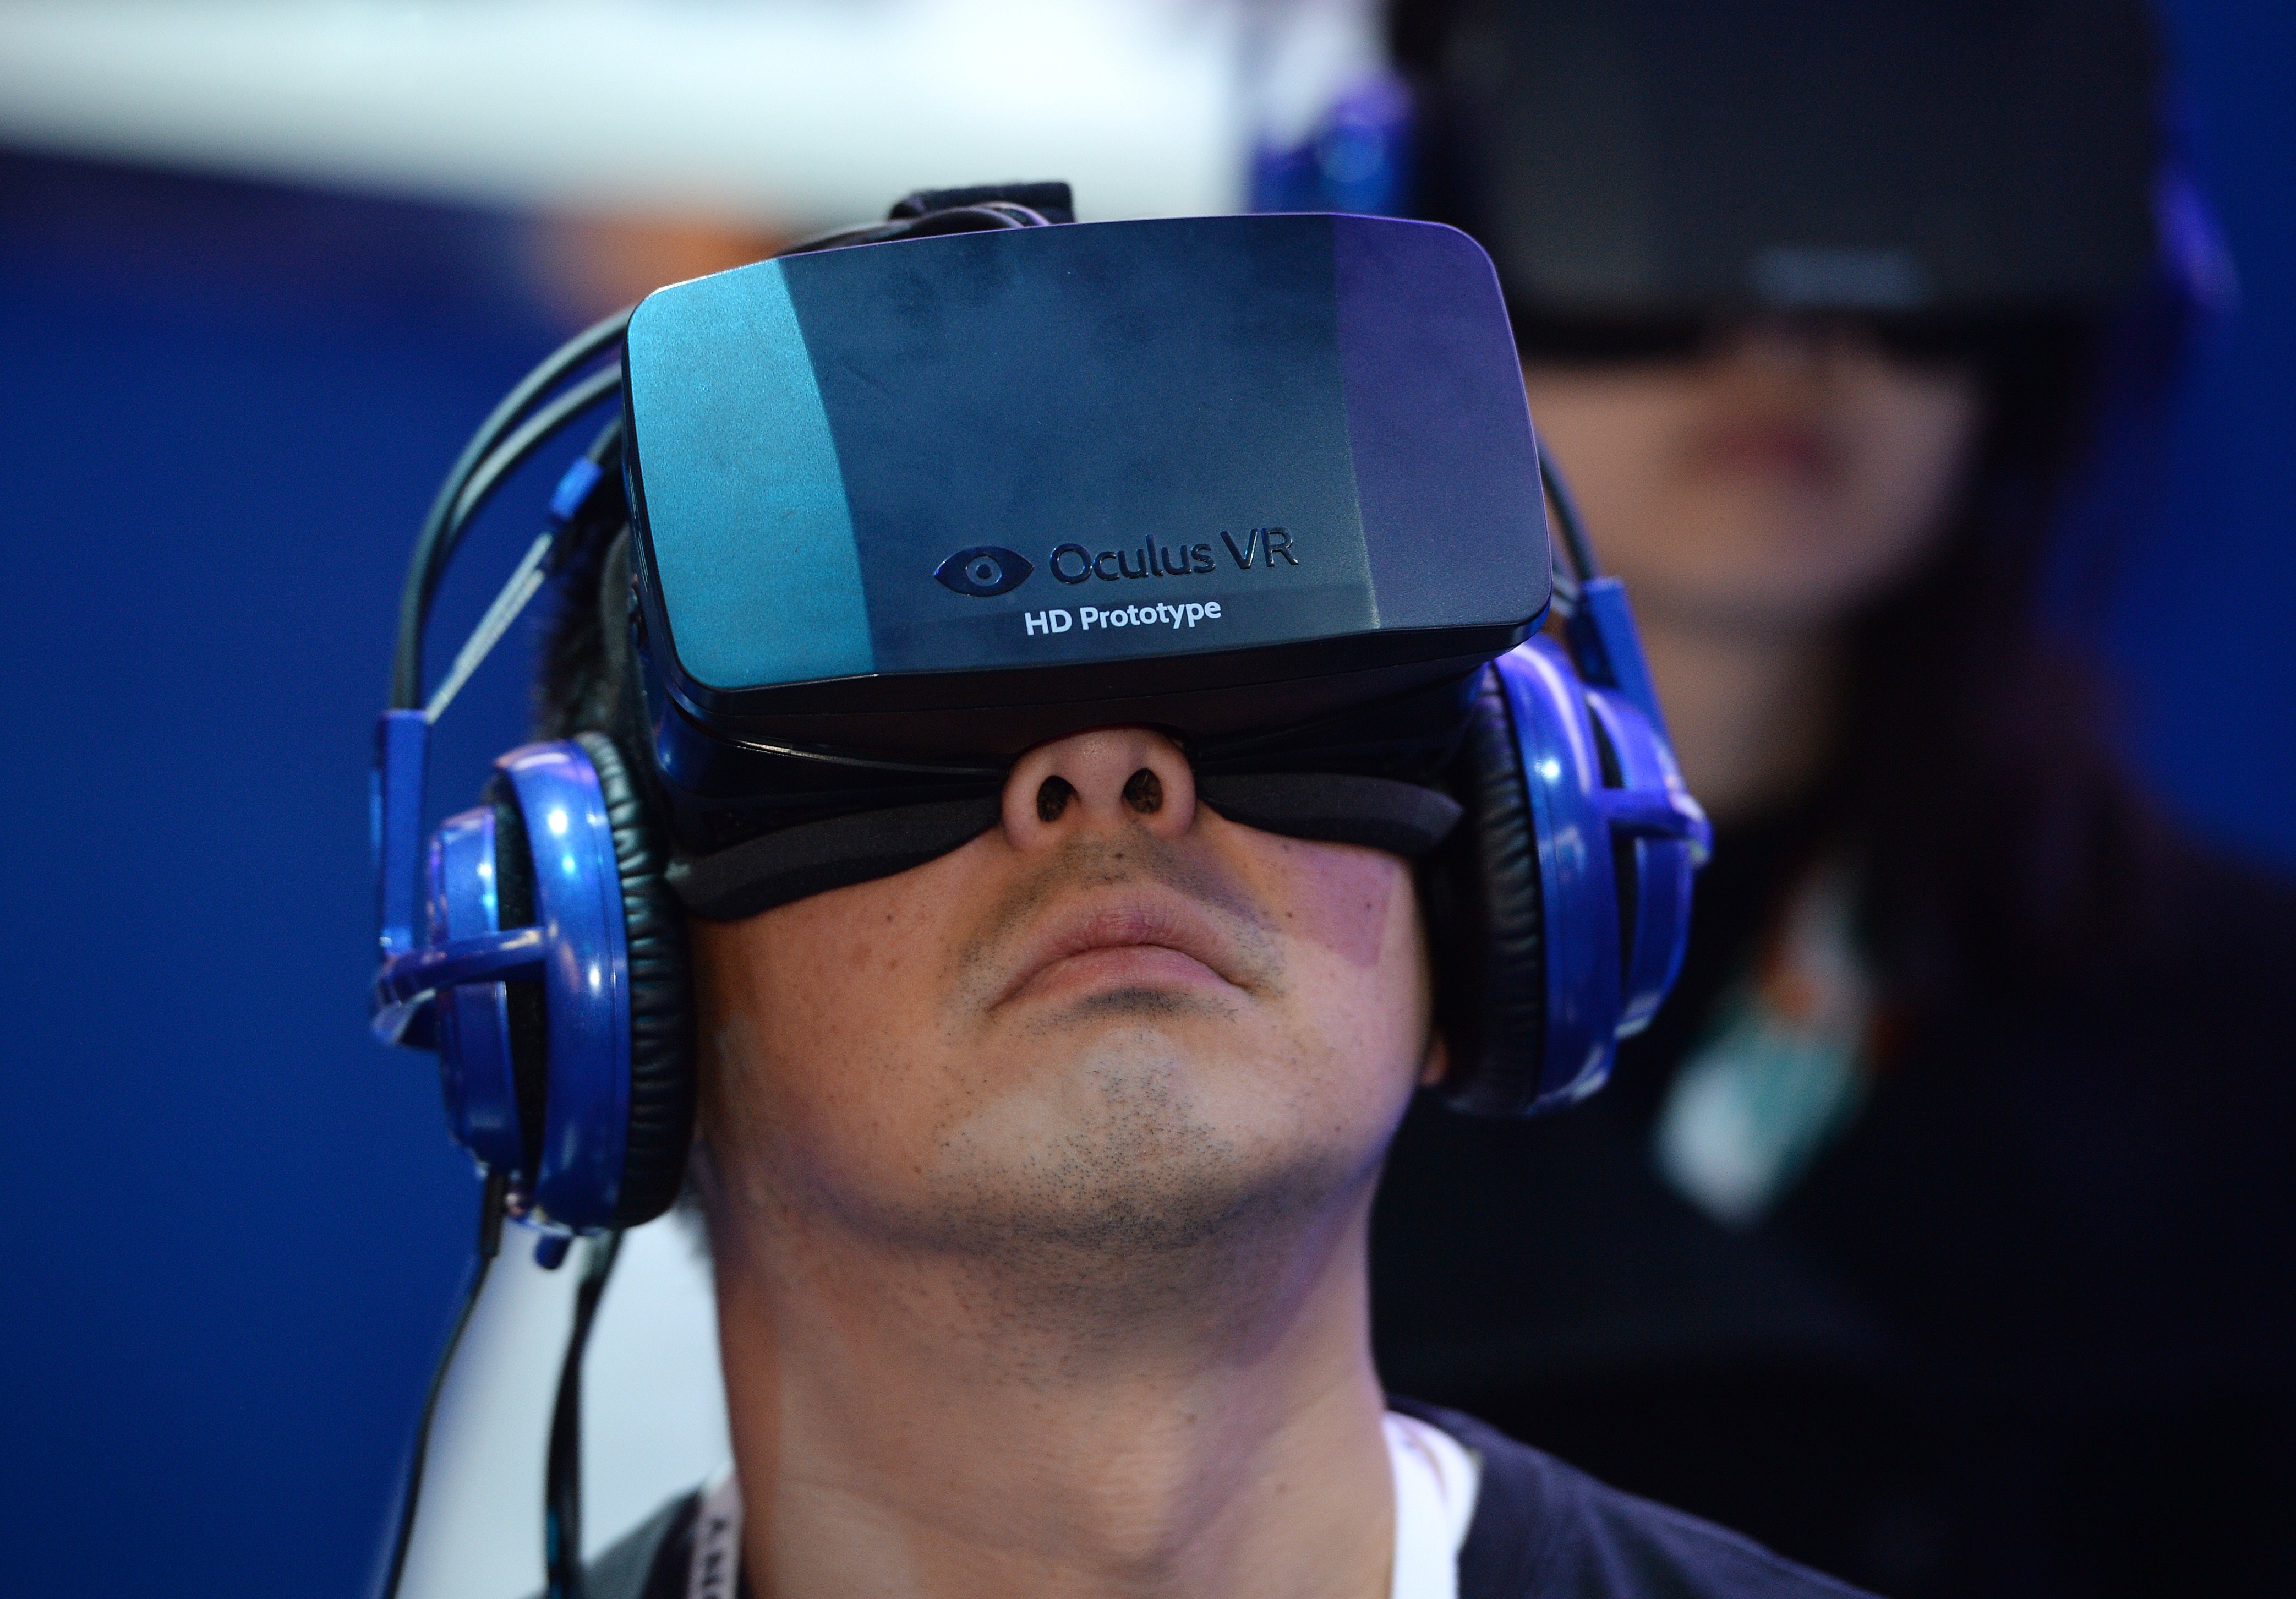 An attendee wears an Oculus Rift HD virtual reality head-mounted display at the 2014 International CES, January 9, 2014 in Las Vegas, Nevada. (Robyn Beck / AFP / Getty Images)